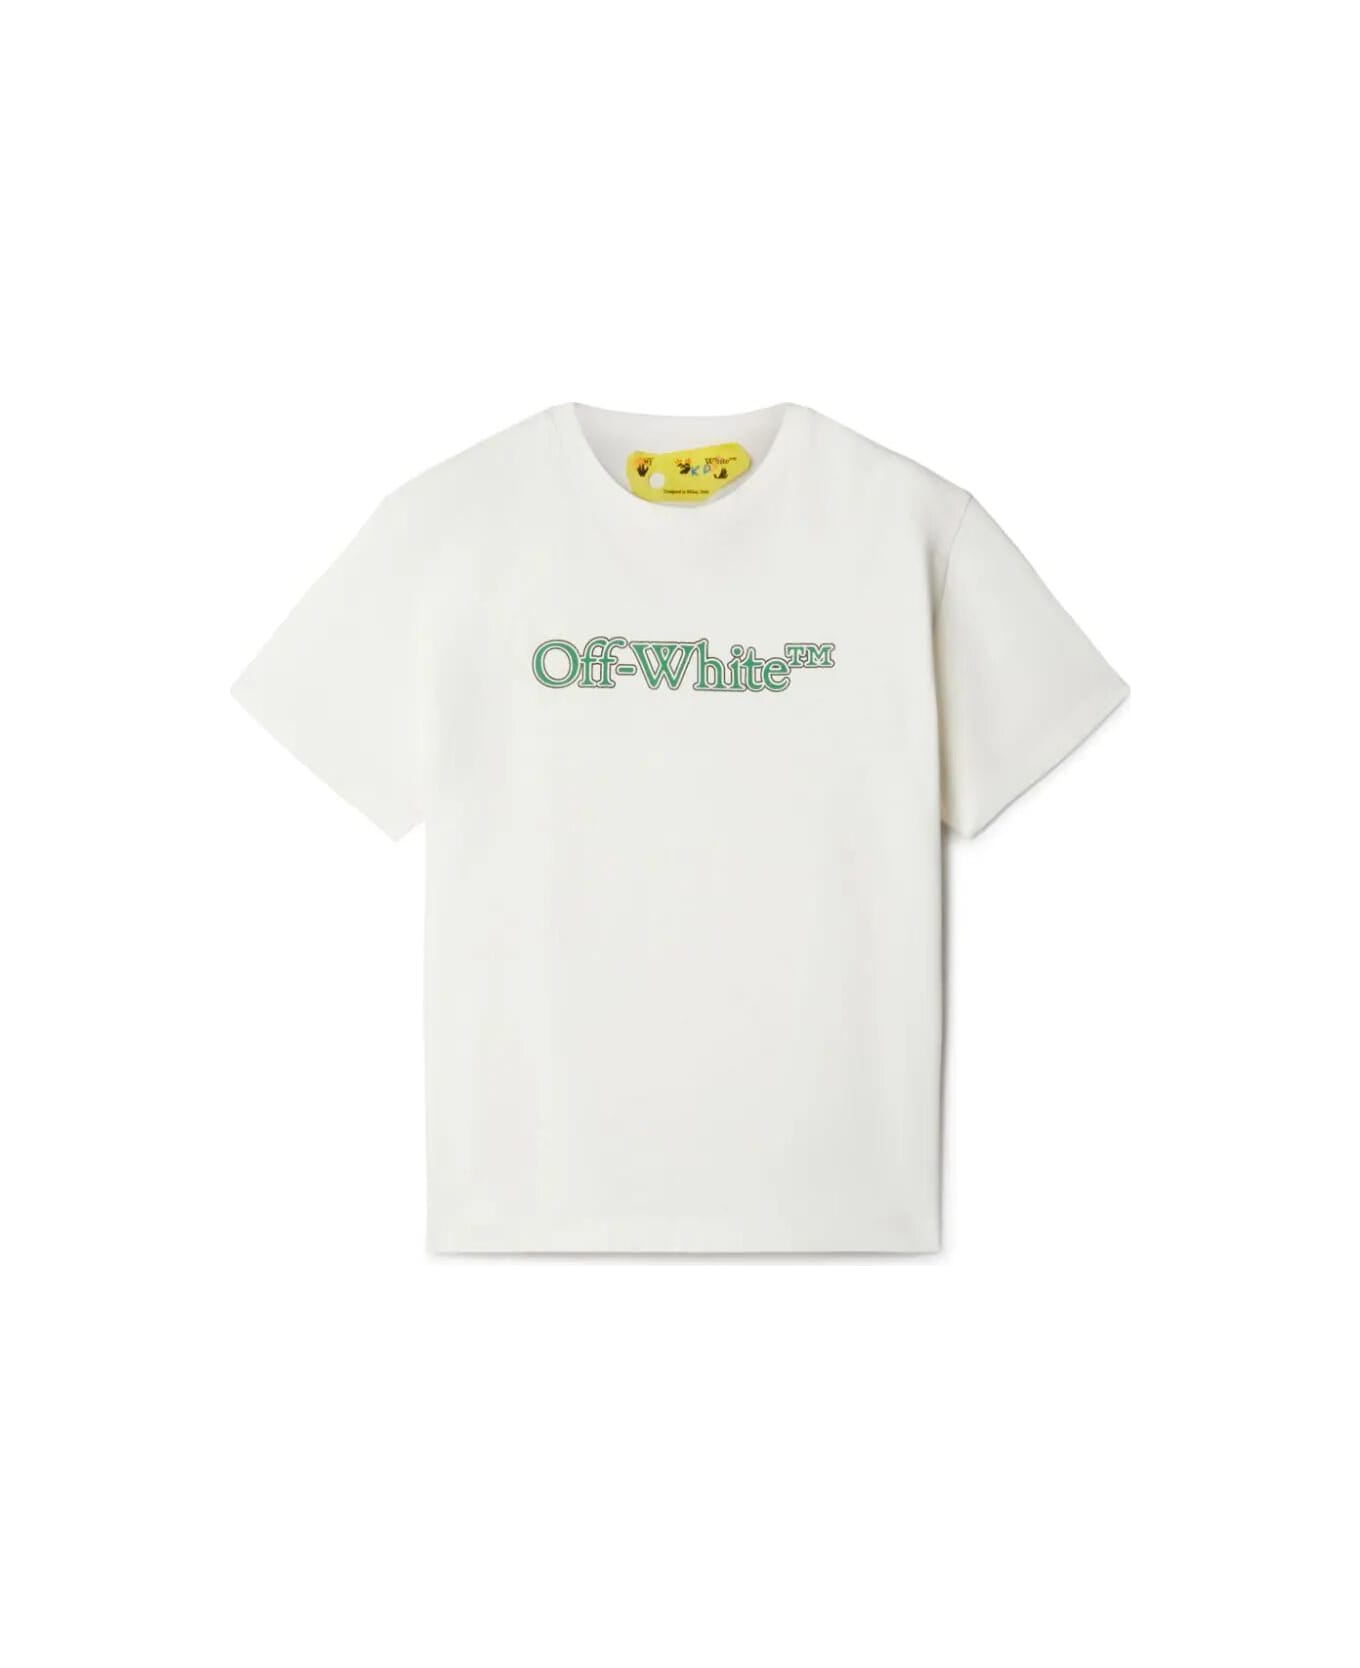 Off-White Big Bookish Short Sleeves T-shirt - White Green Tシャツ＆ポロシャツ